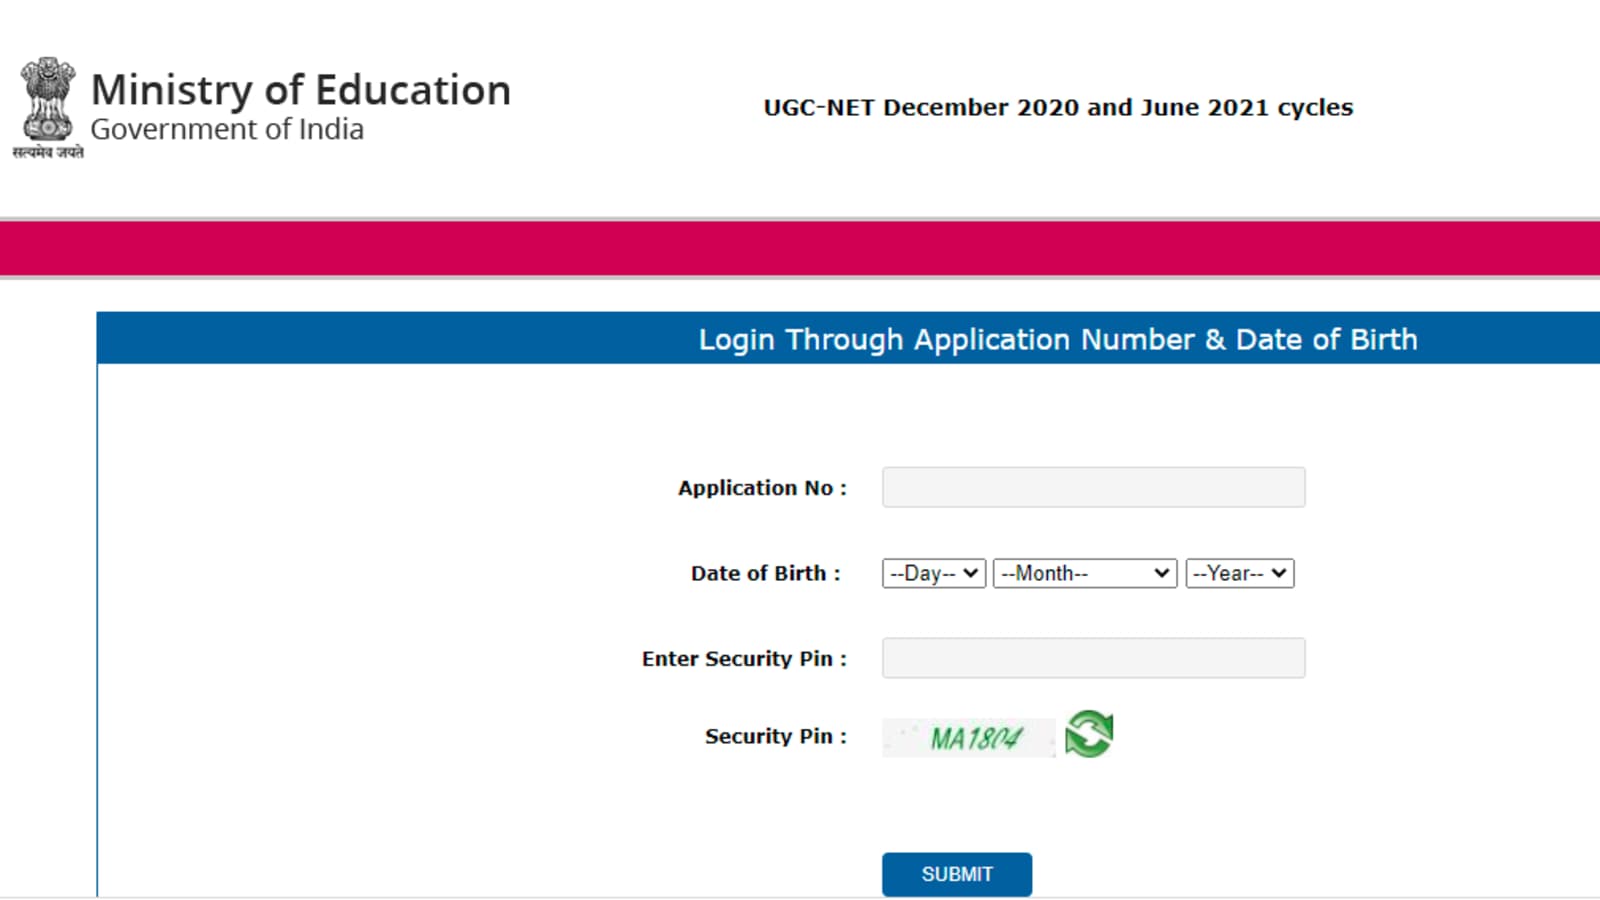 UGC NET admit cards released for exams on November 24, 25 and 26, direct link